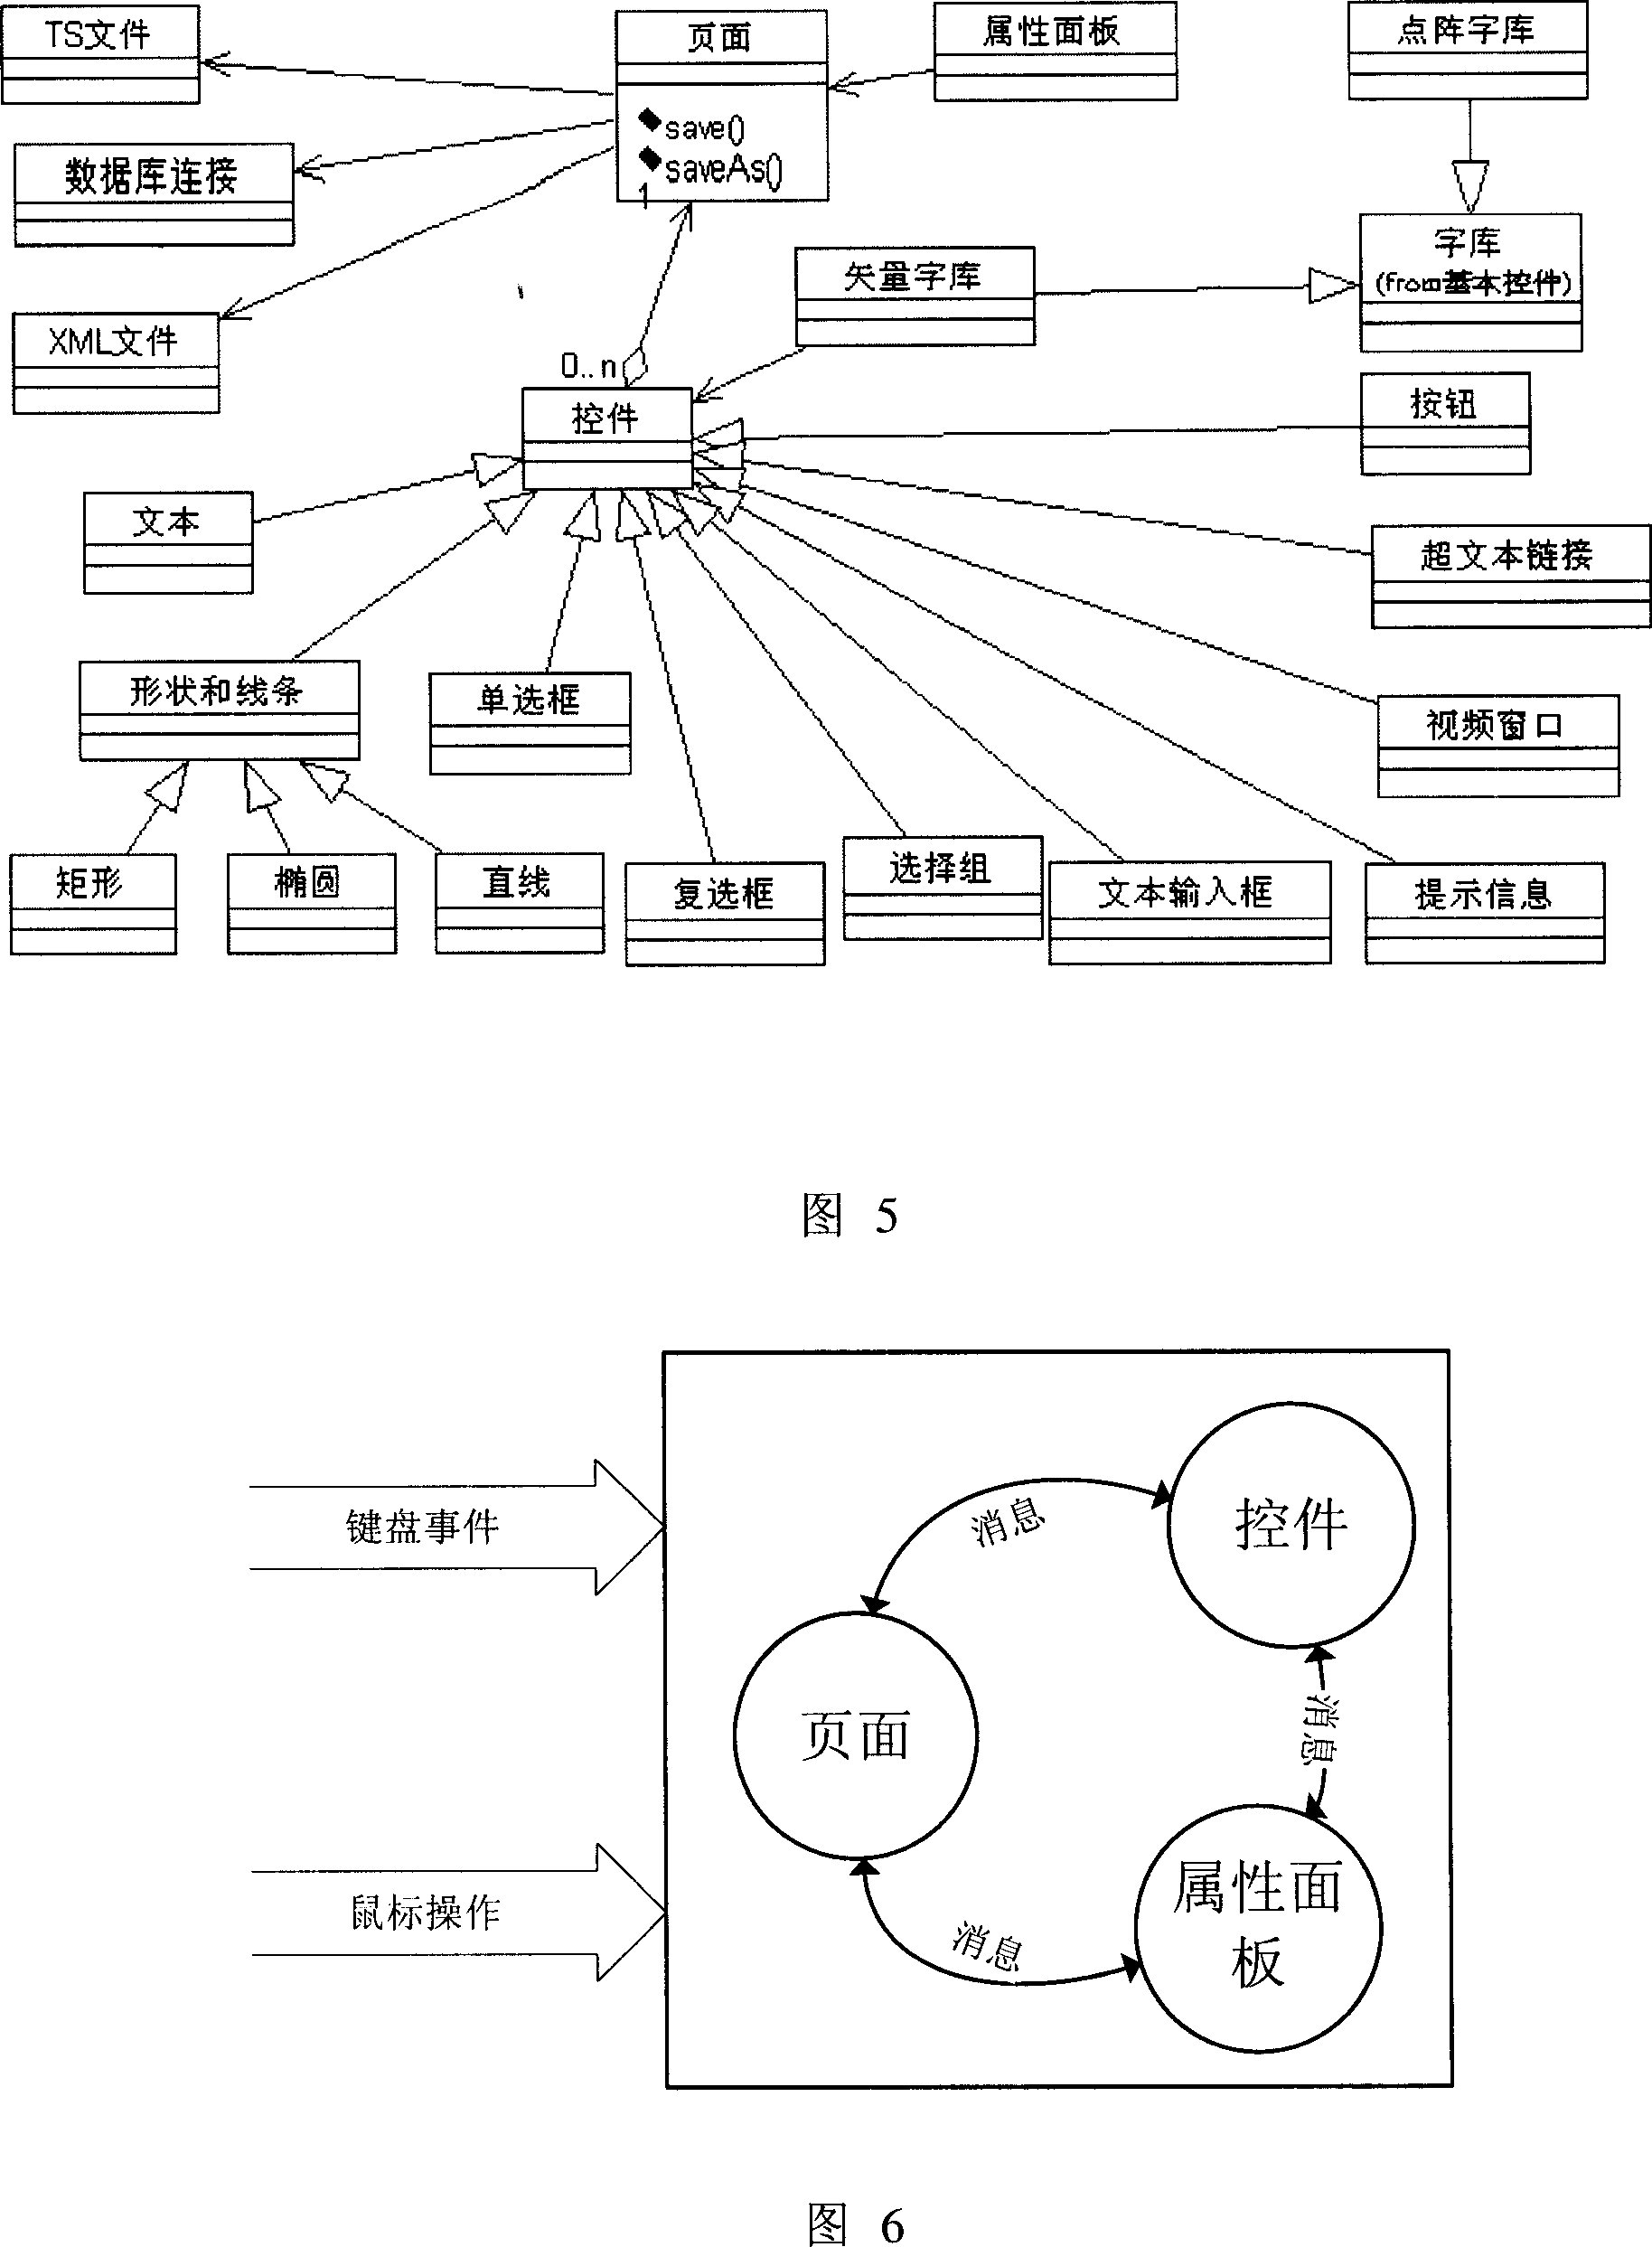 Value-added application service supporting system for digital TV and its method